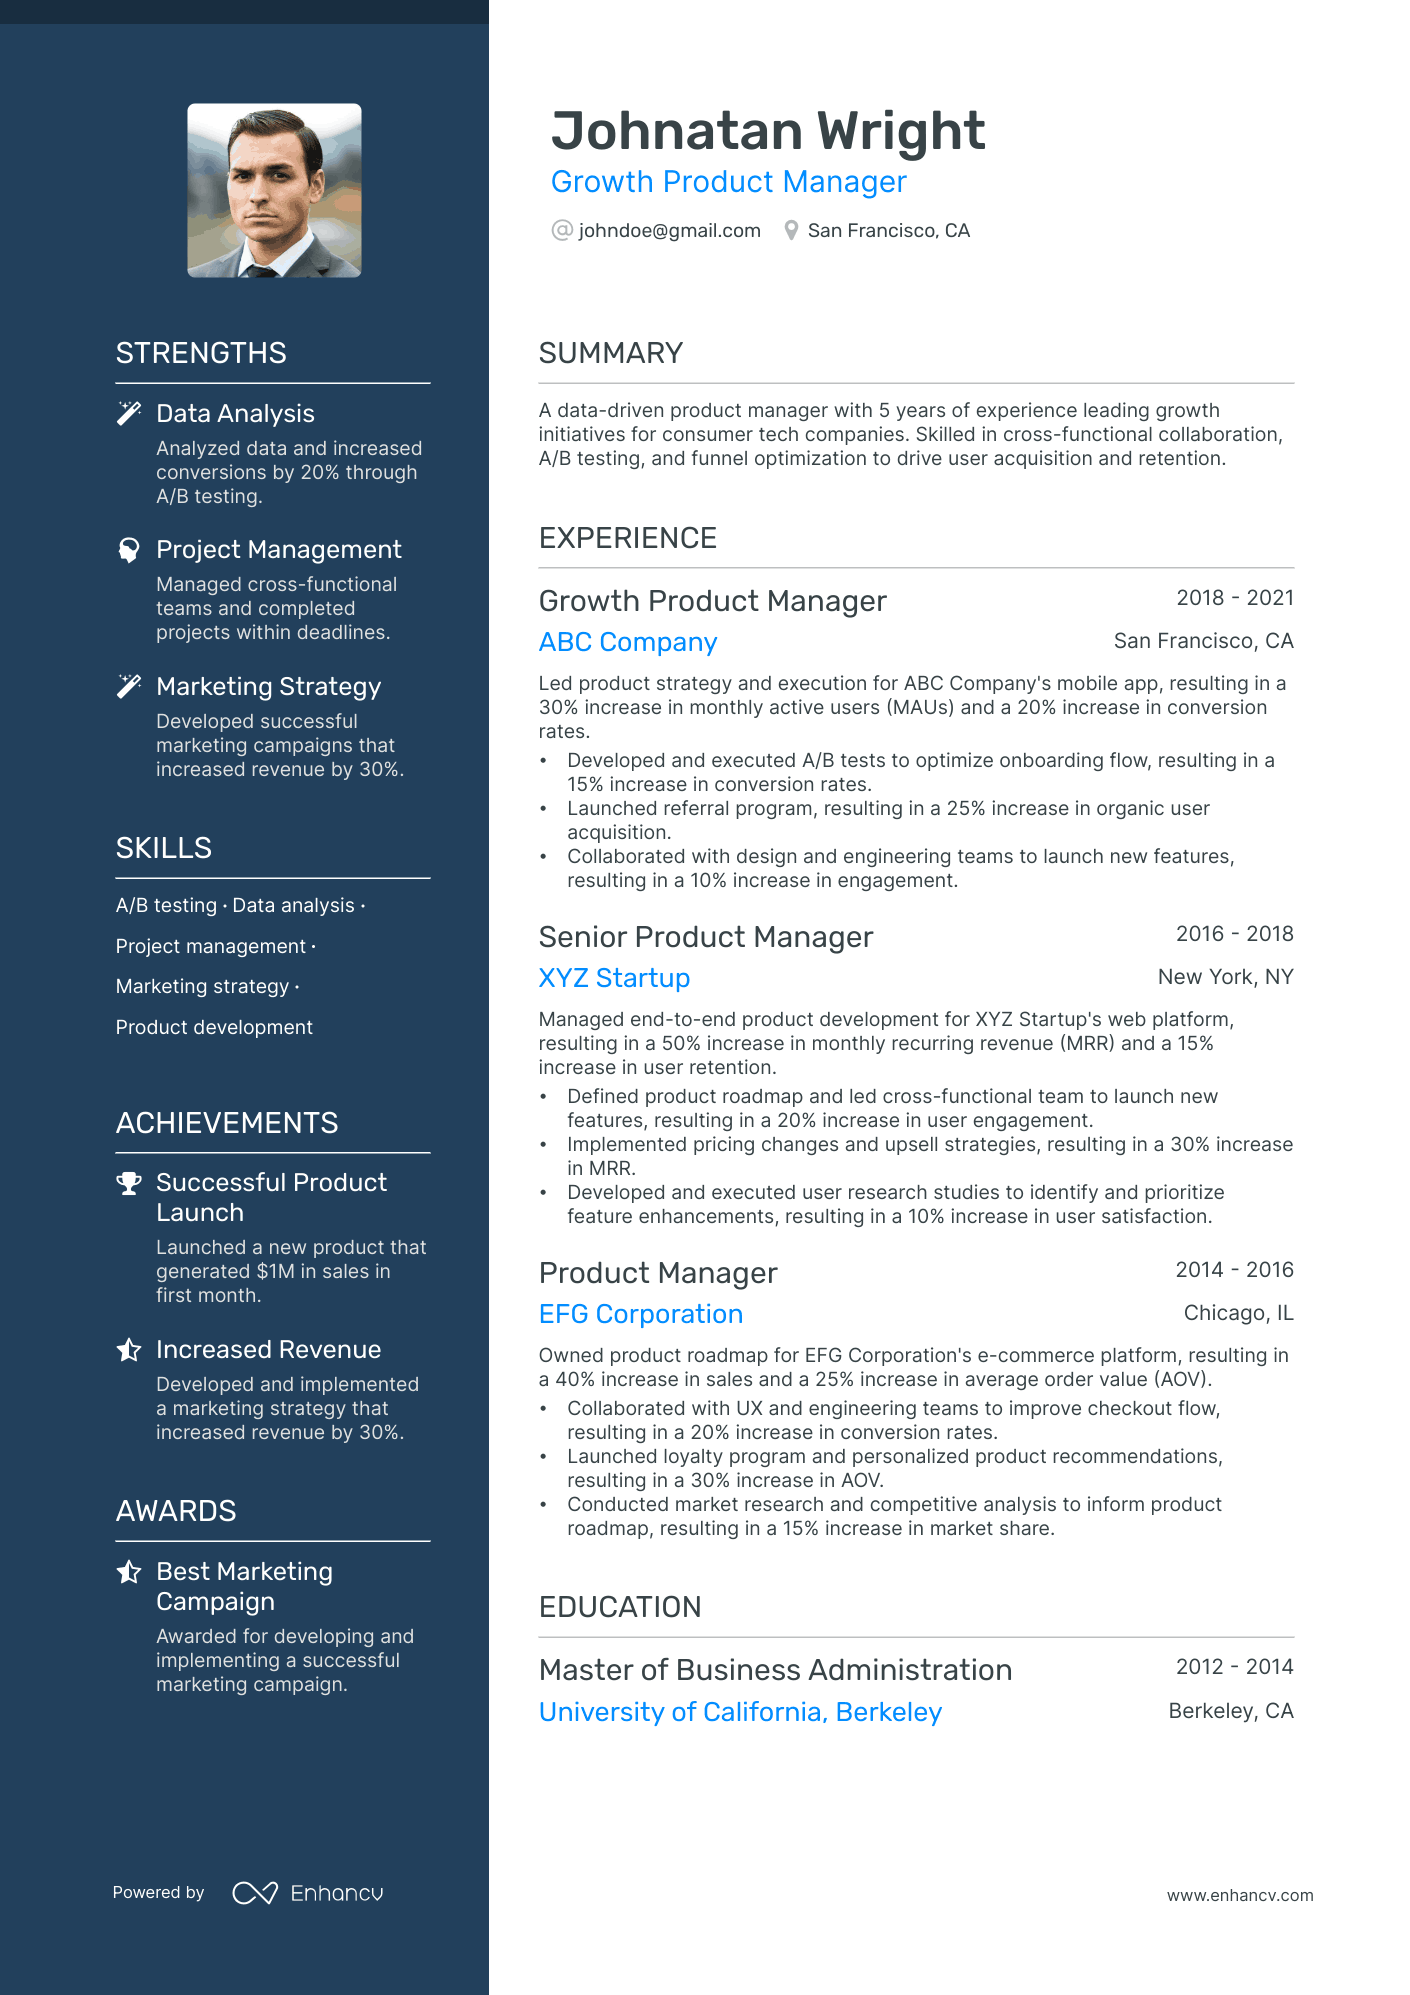 Growth Product Manager resume example